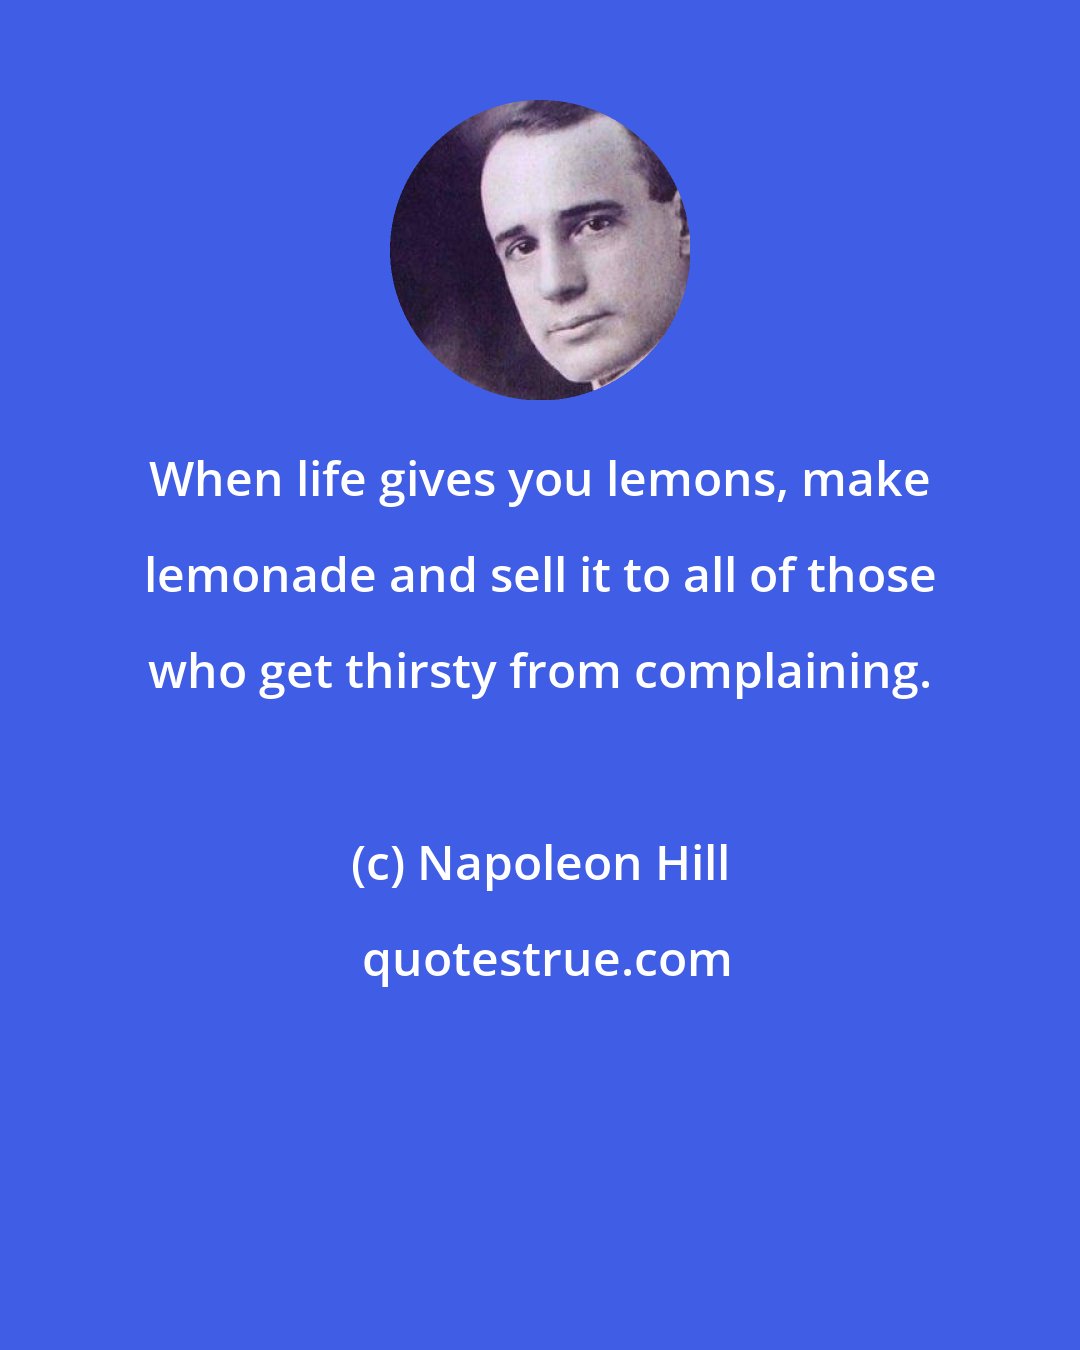 Napoleon Hill: When life gives you lemons, make lemonade and sell it to all of those who get thirsty from complaining.